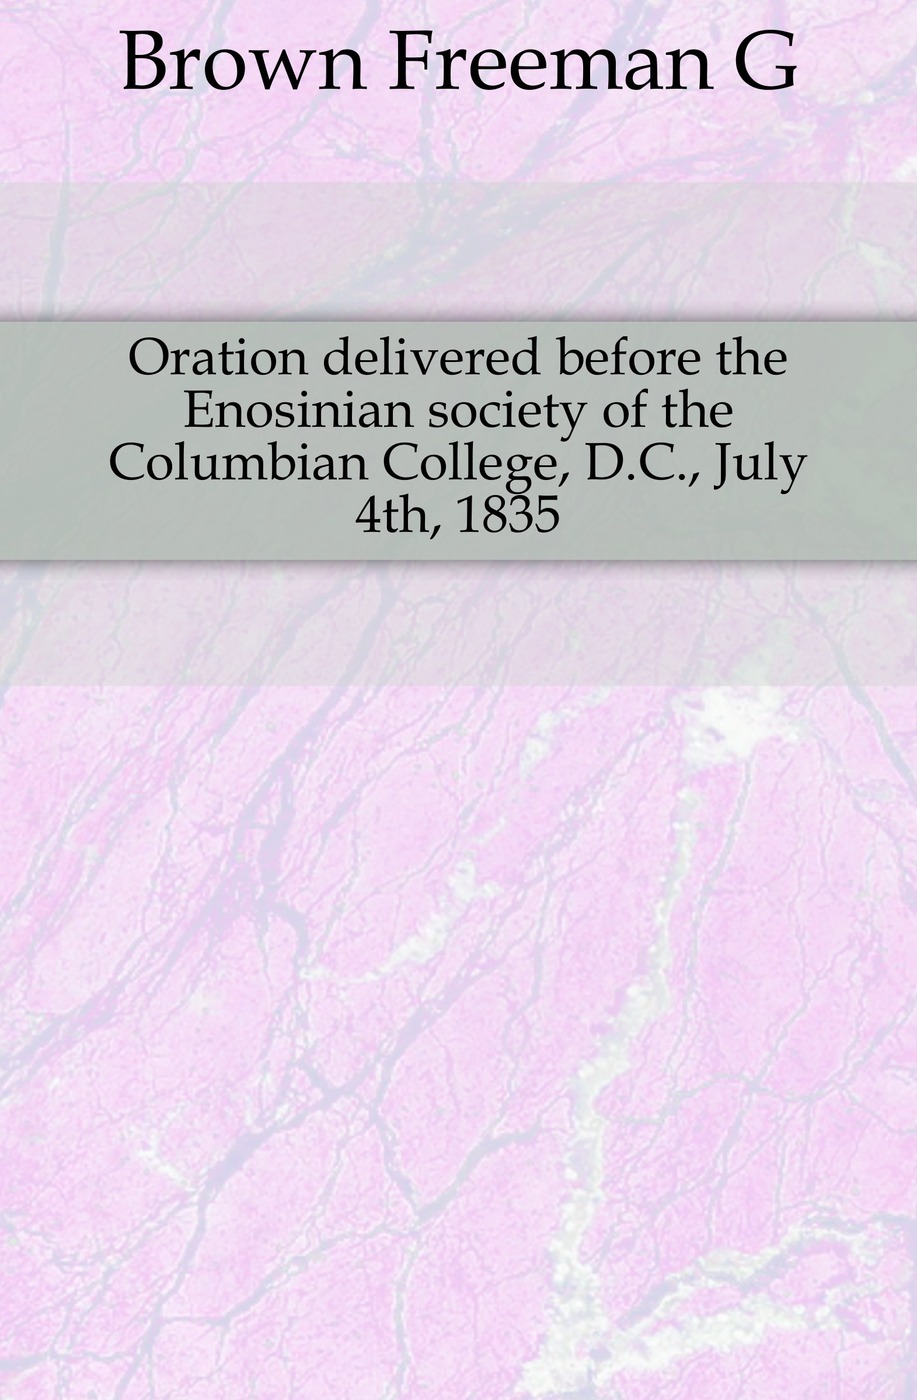 Oration delivered before the Enosinian society of the Columbian College, D.C., July 4th, 1835